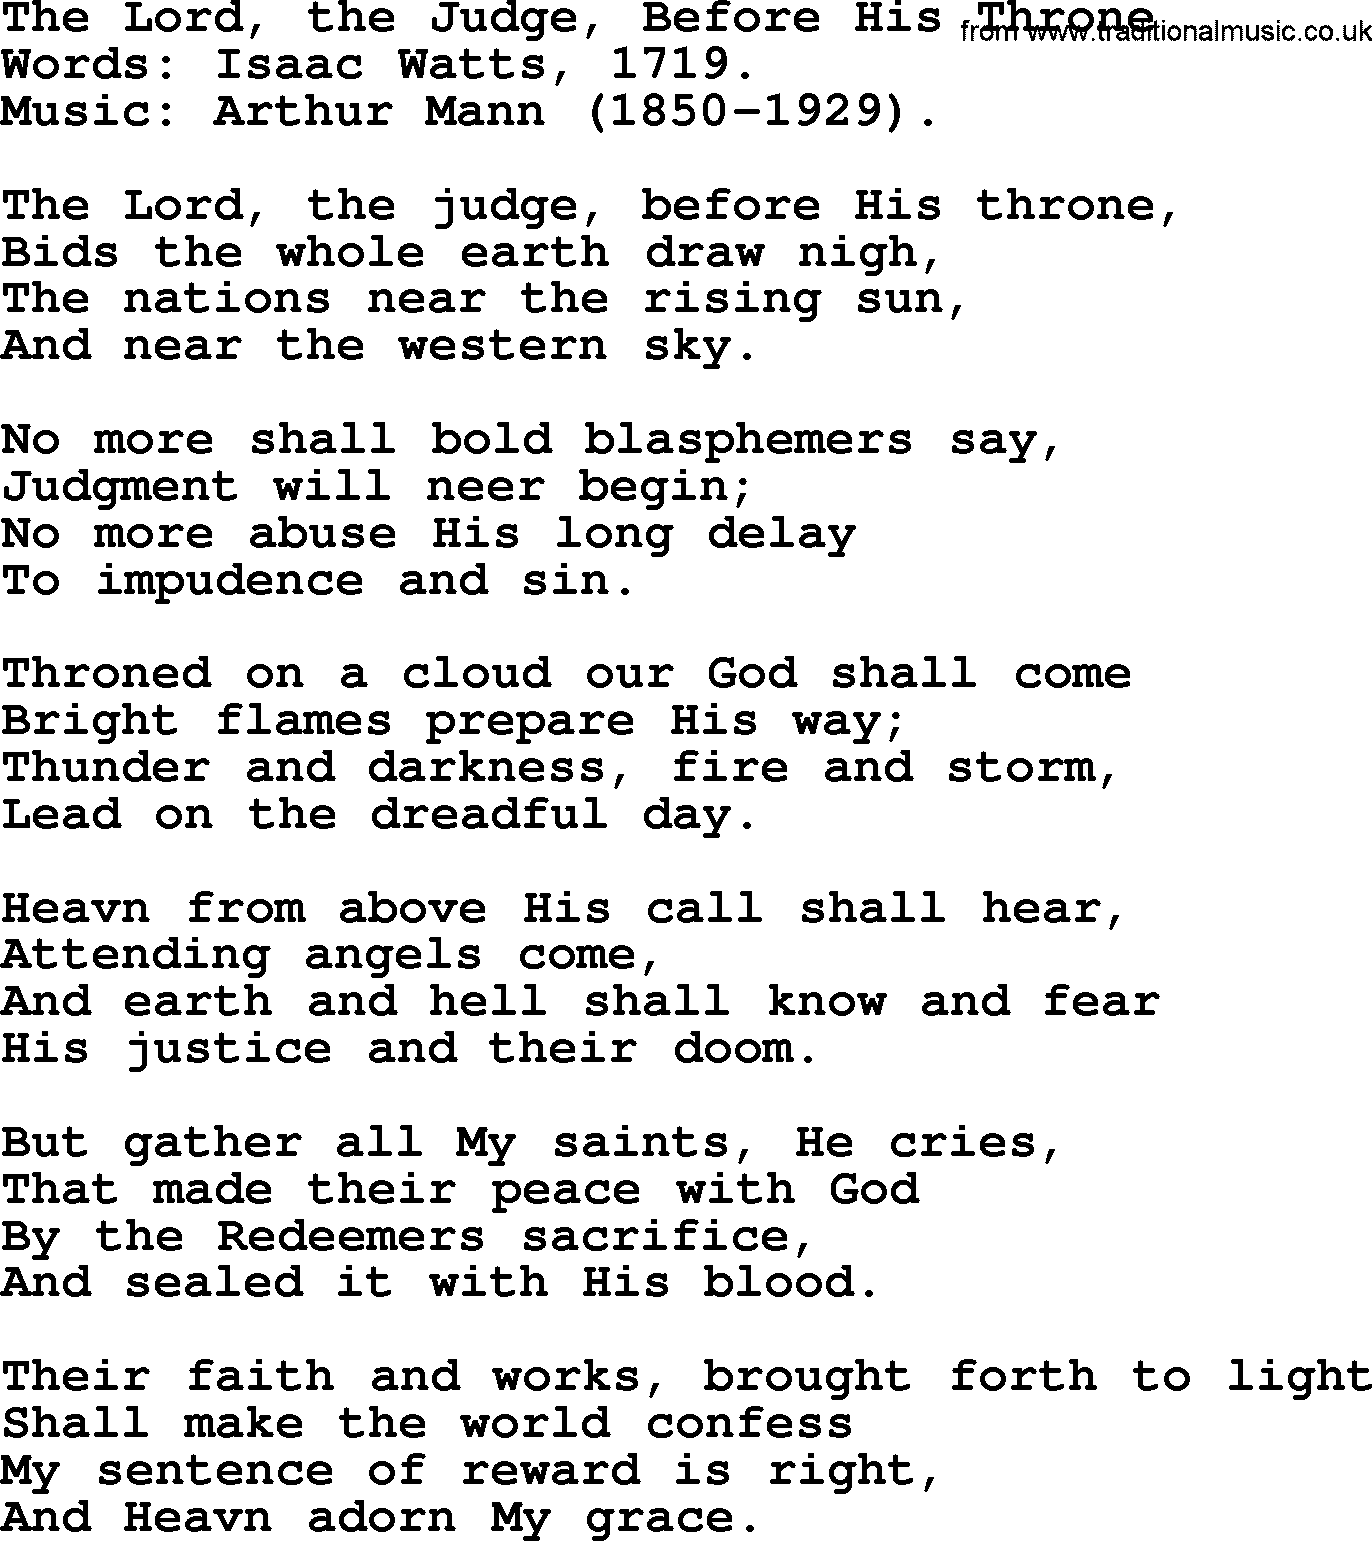 Isaac Watts Christian hymn: The Lord, the Judge, Before His Throne- lyricss